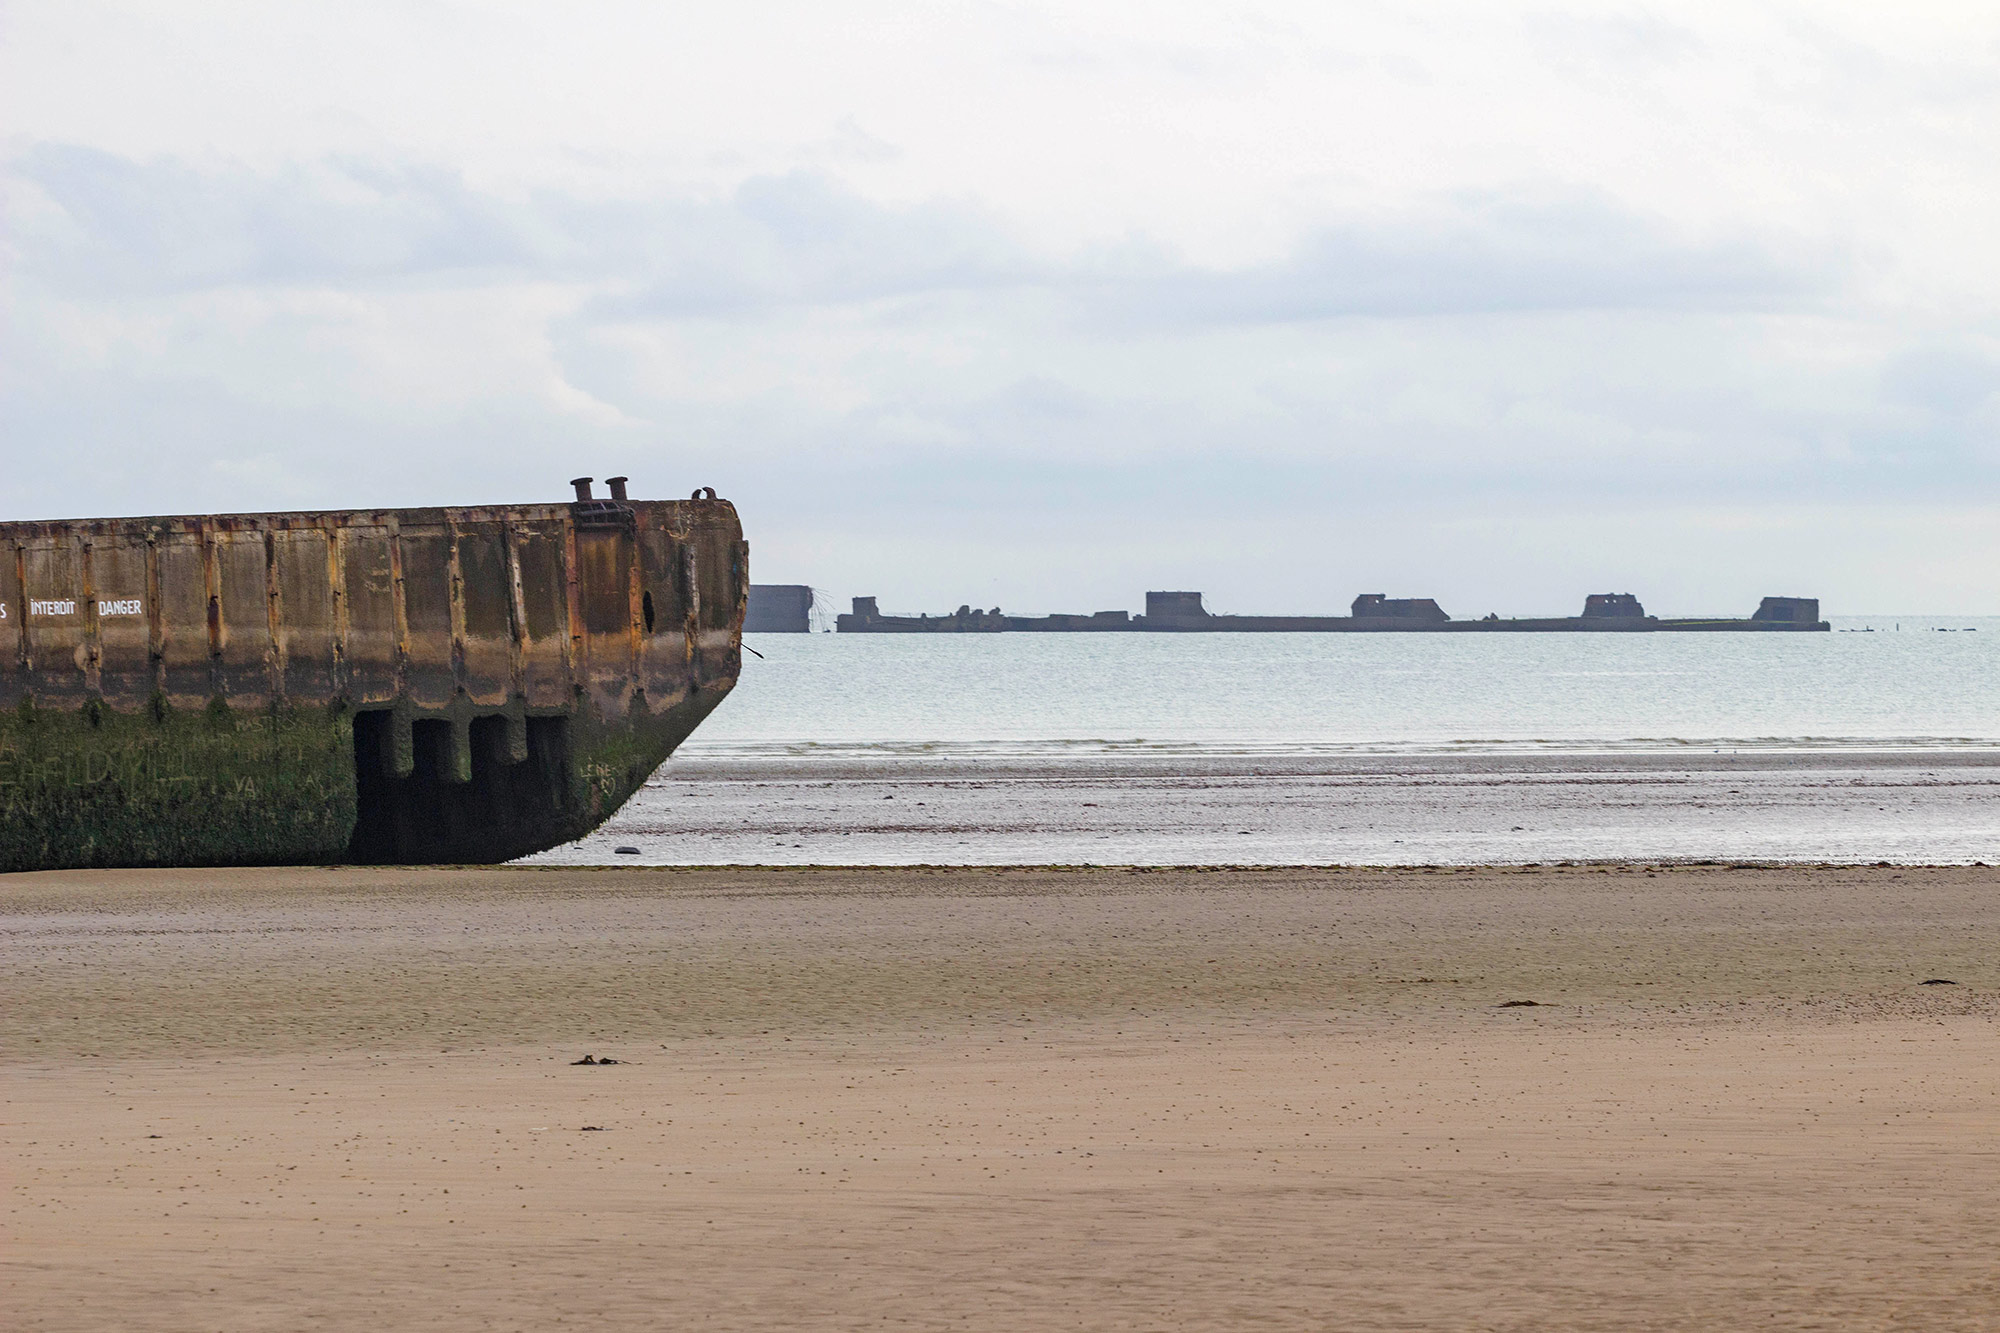 D-Day Landing Beach View With The Leftover Floating Pontoons, Normandy, France